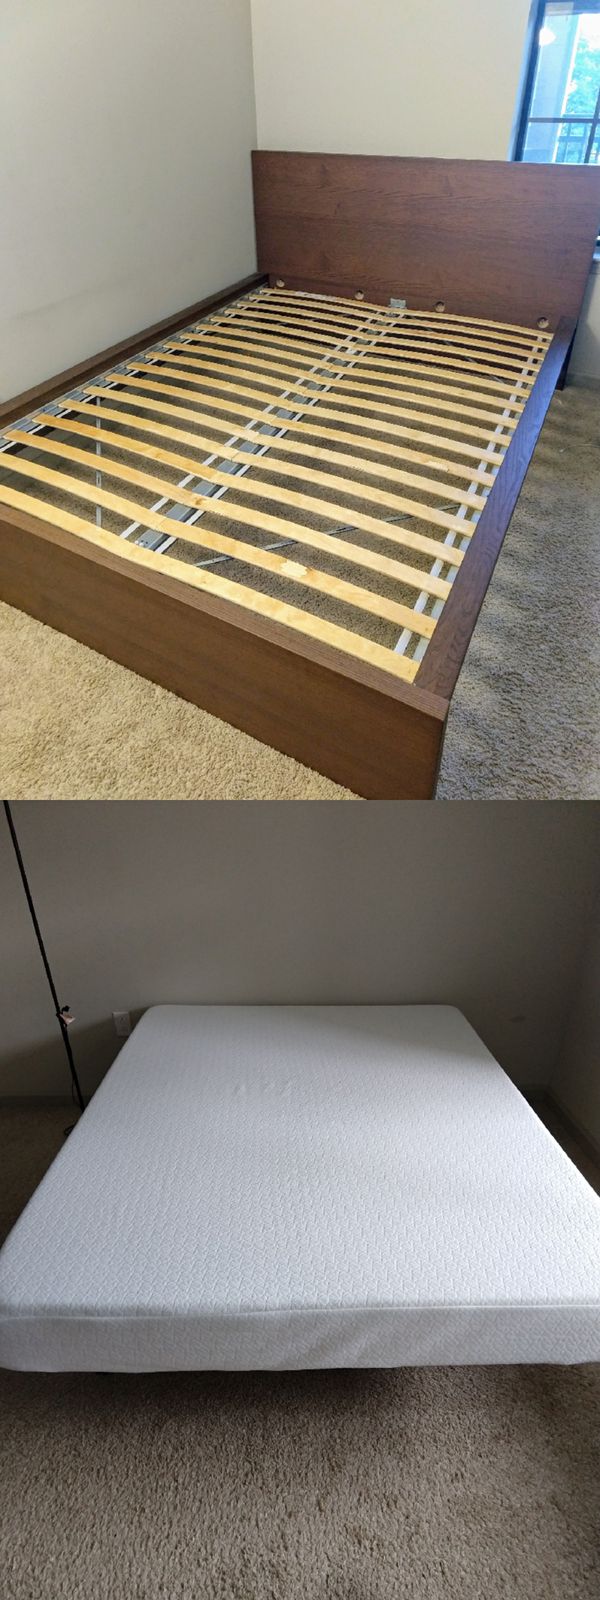 Queen-Size IKEA Bed Frame & 6" Memory Foam Mattress for Sale in Durham, NC - OfferUp